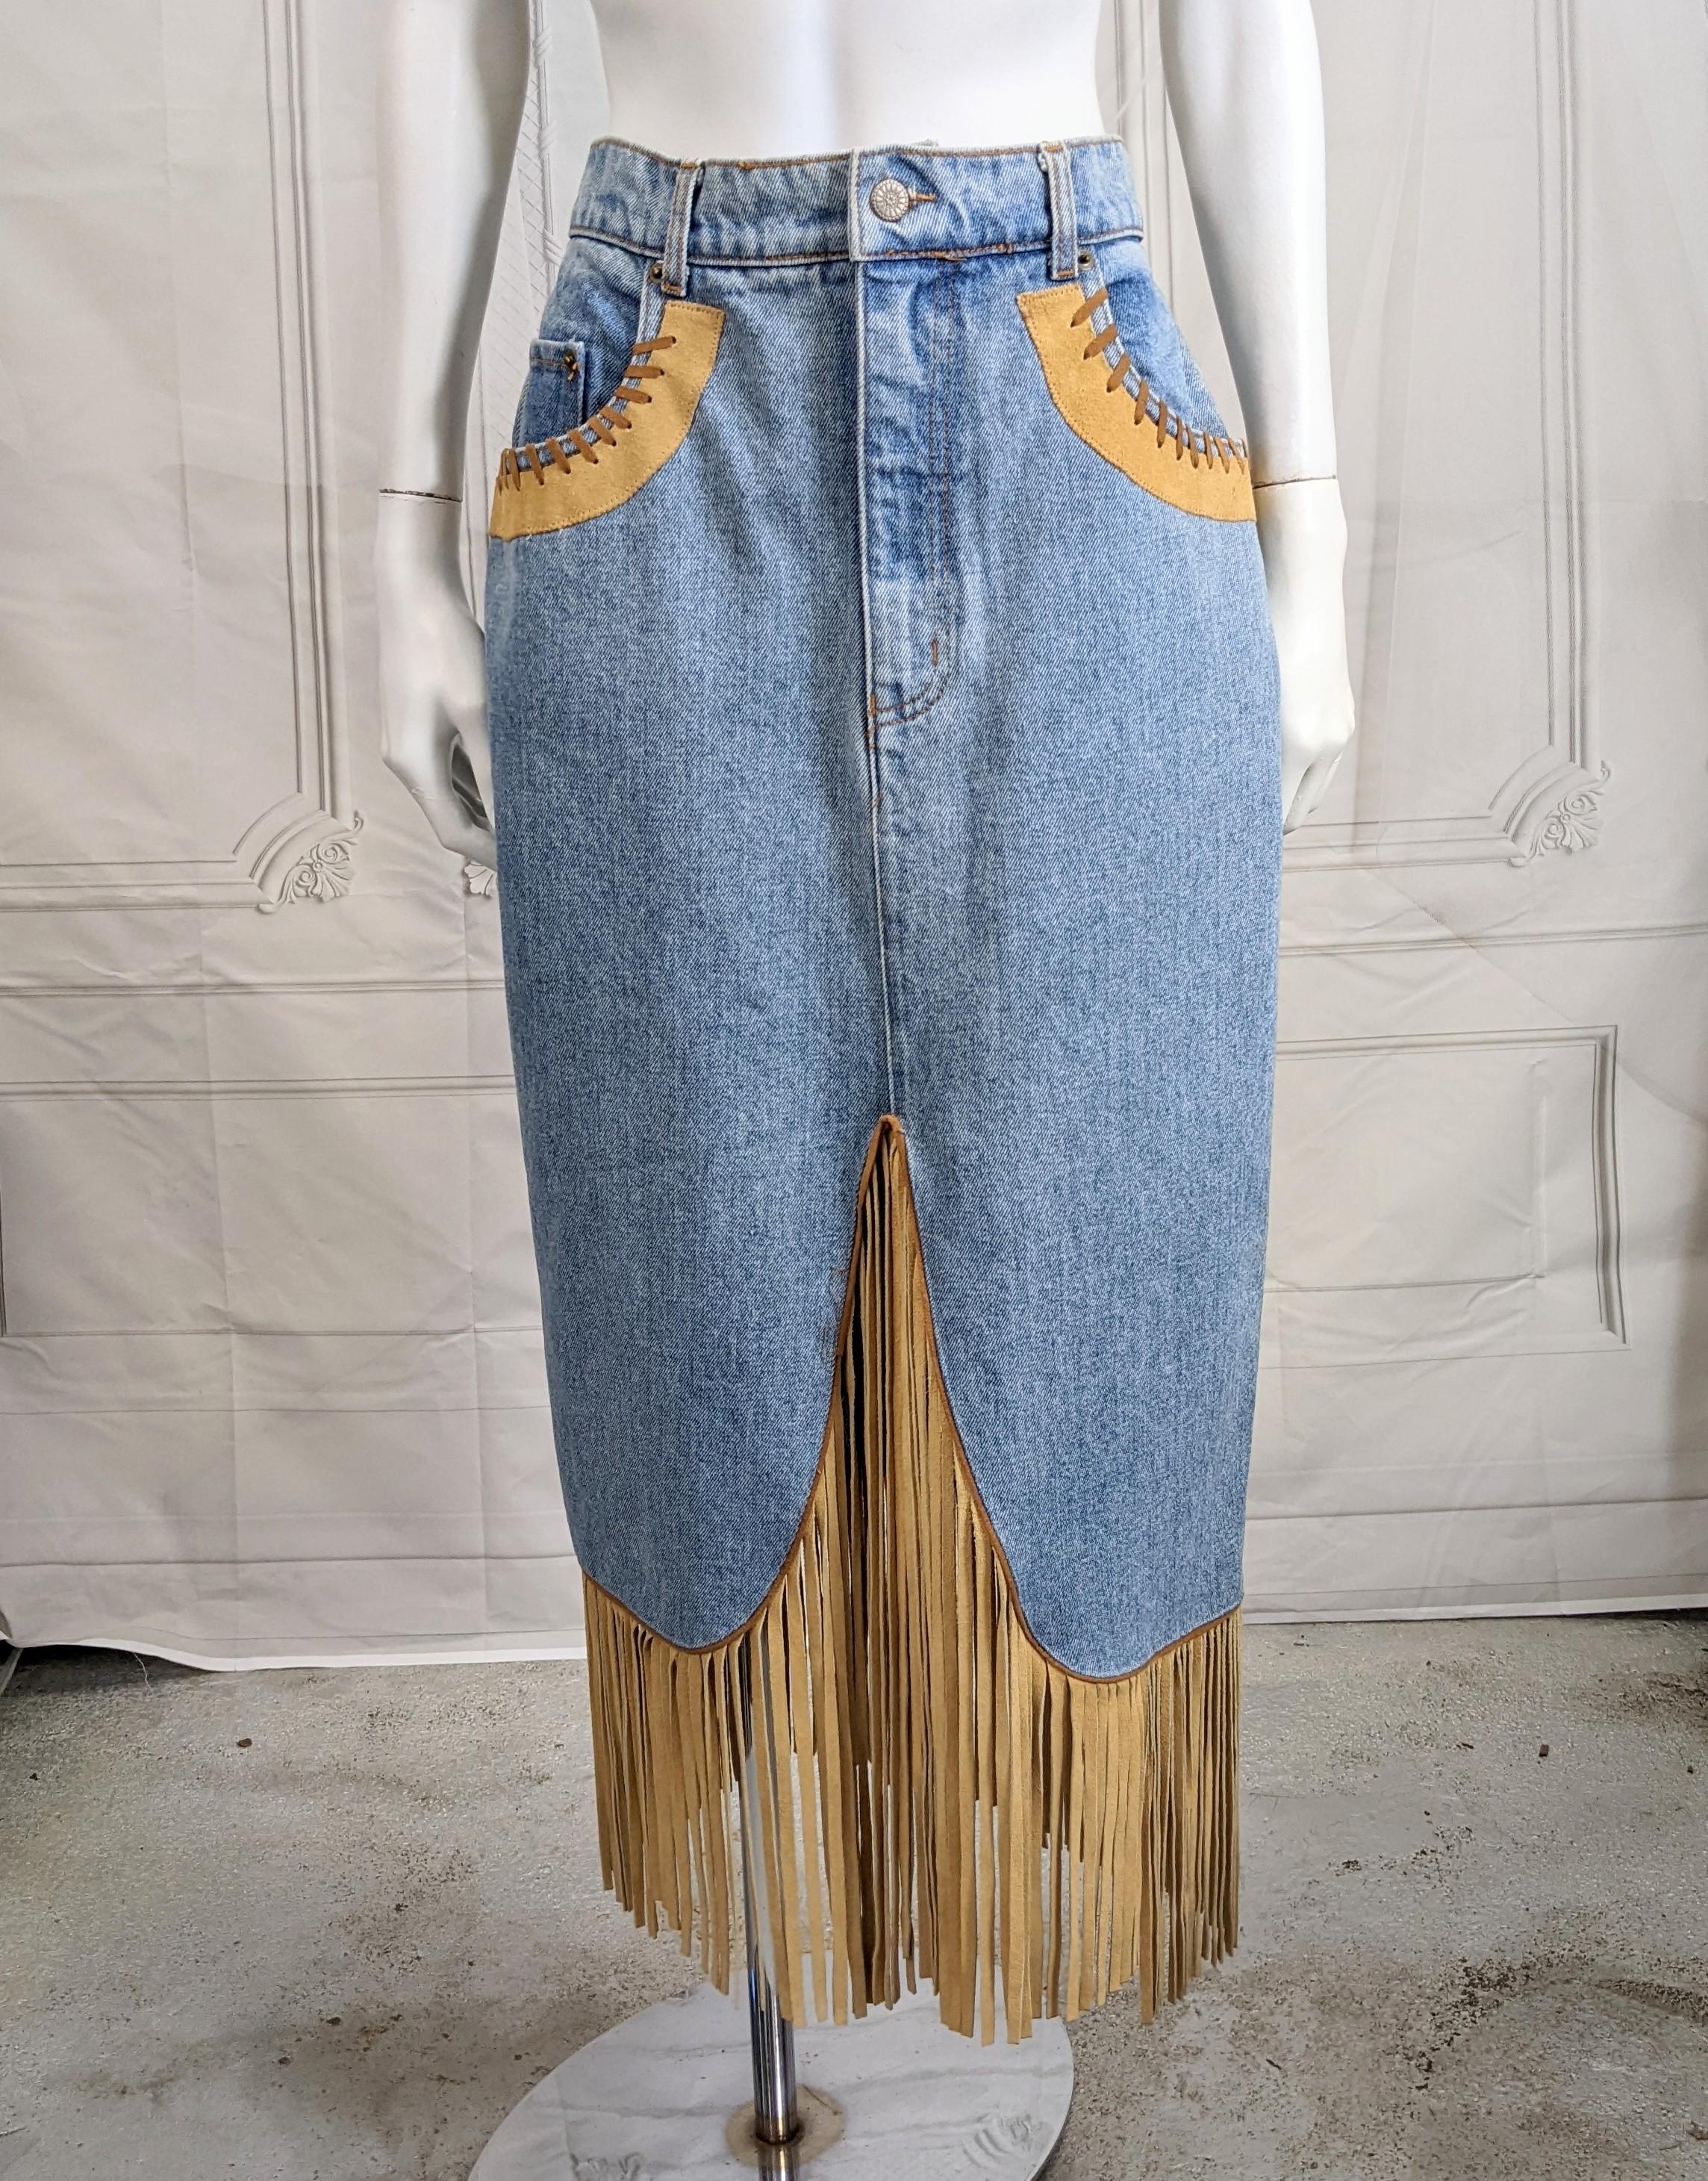 Fun Western Inspired Denim Fringed Skirt from the 1980's. Made in France by Sapman and styled as a denim skirt with leather and suede lacing details. Buttons in front with faux fly and completely opens down the back. 
Great movement when worn. 